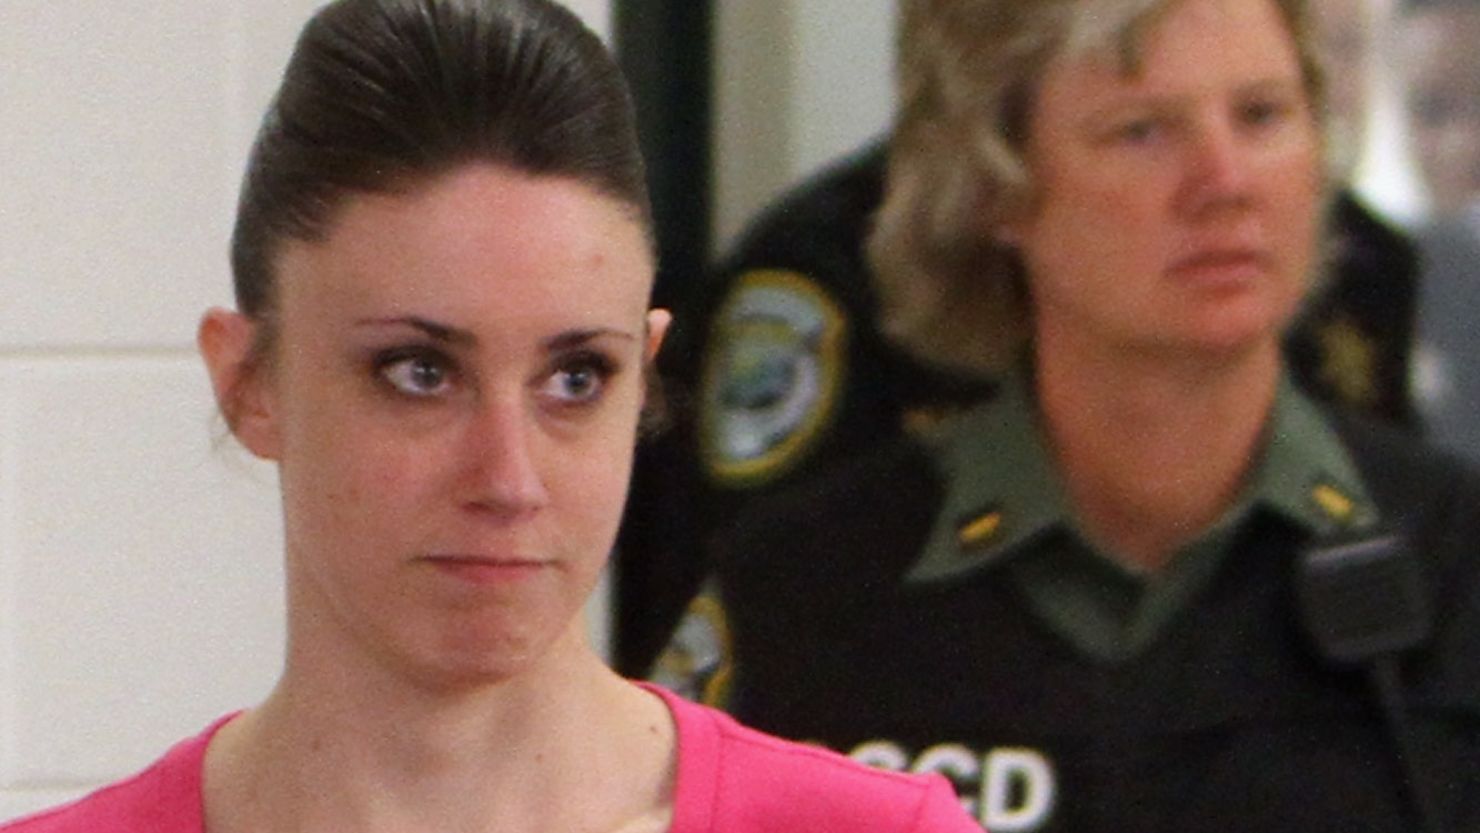  Casey Anthony's attorneys have argued that she never identified this specific woman as the nanny named "Zenaida Gonzalez."